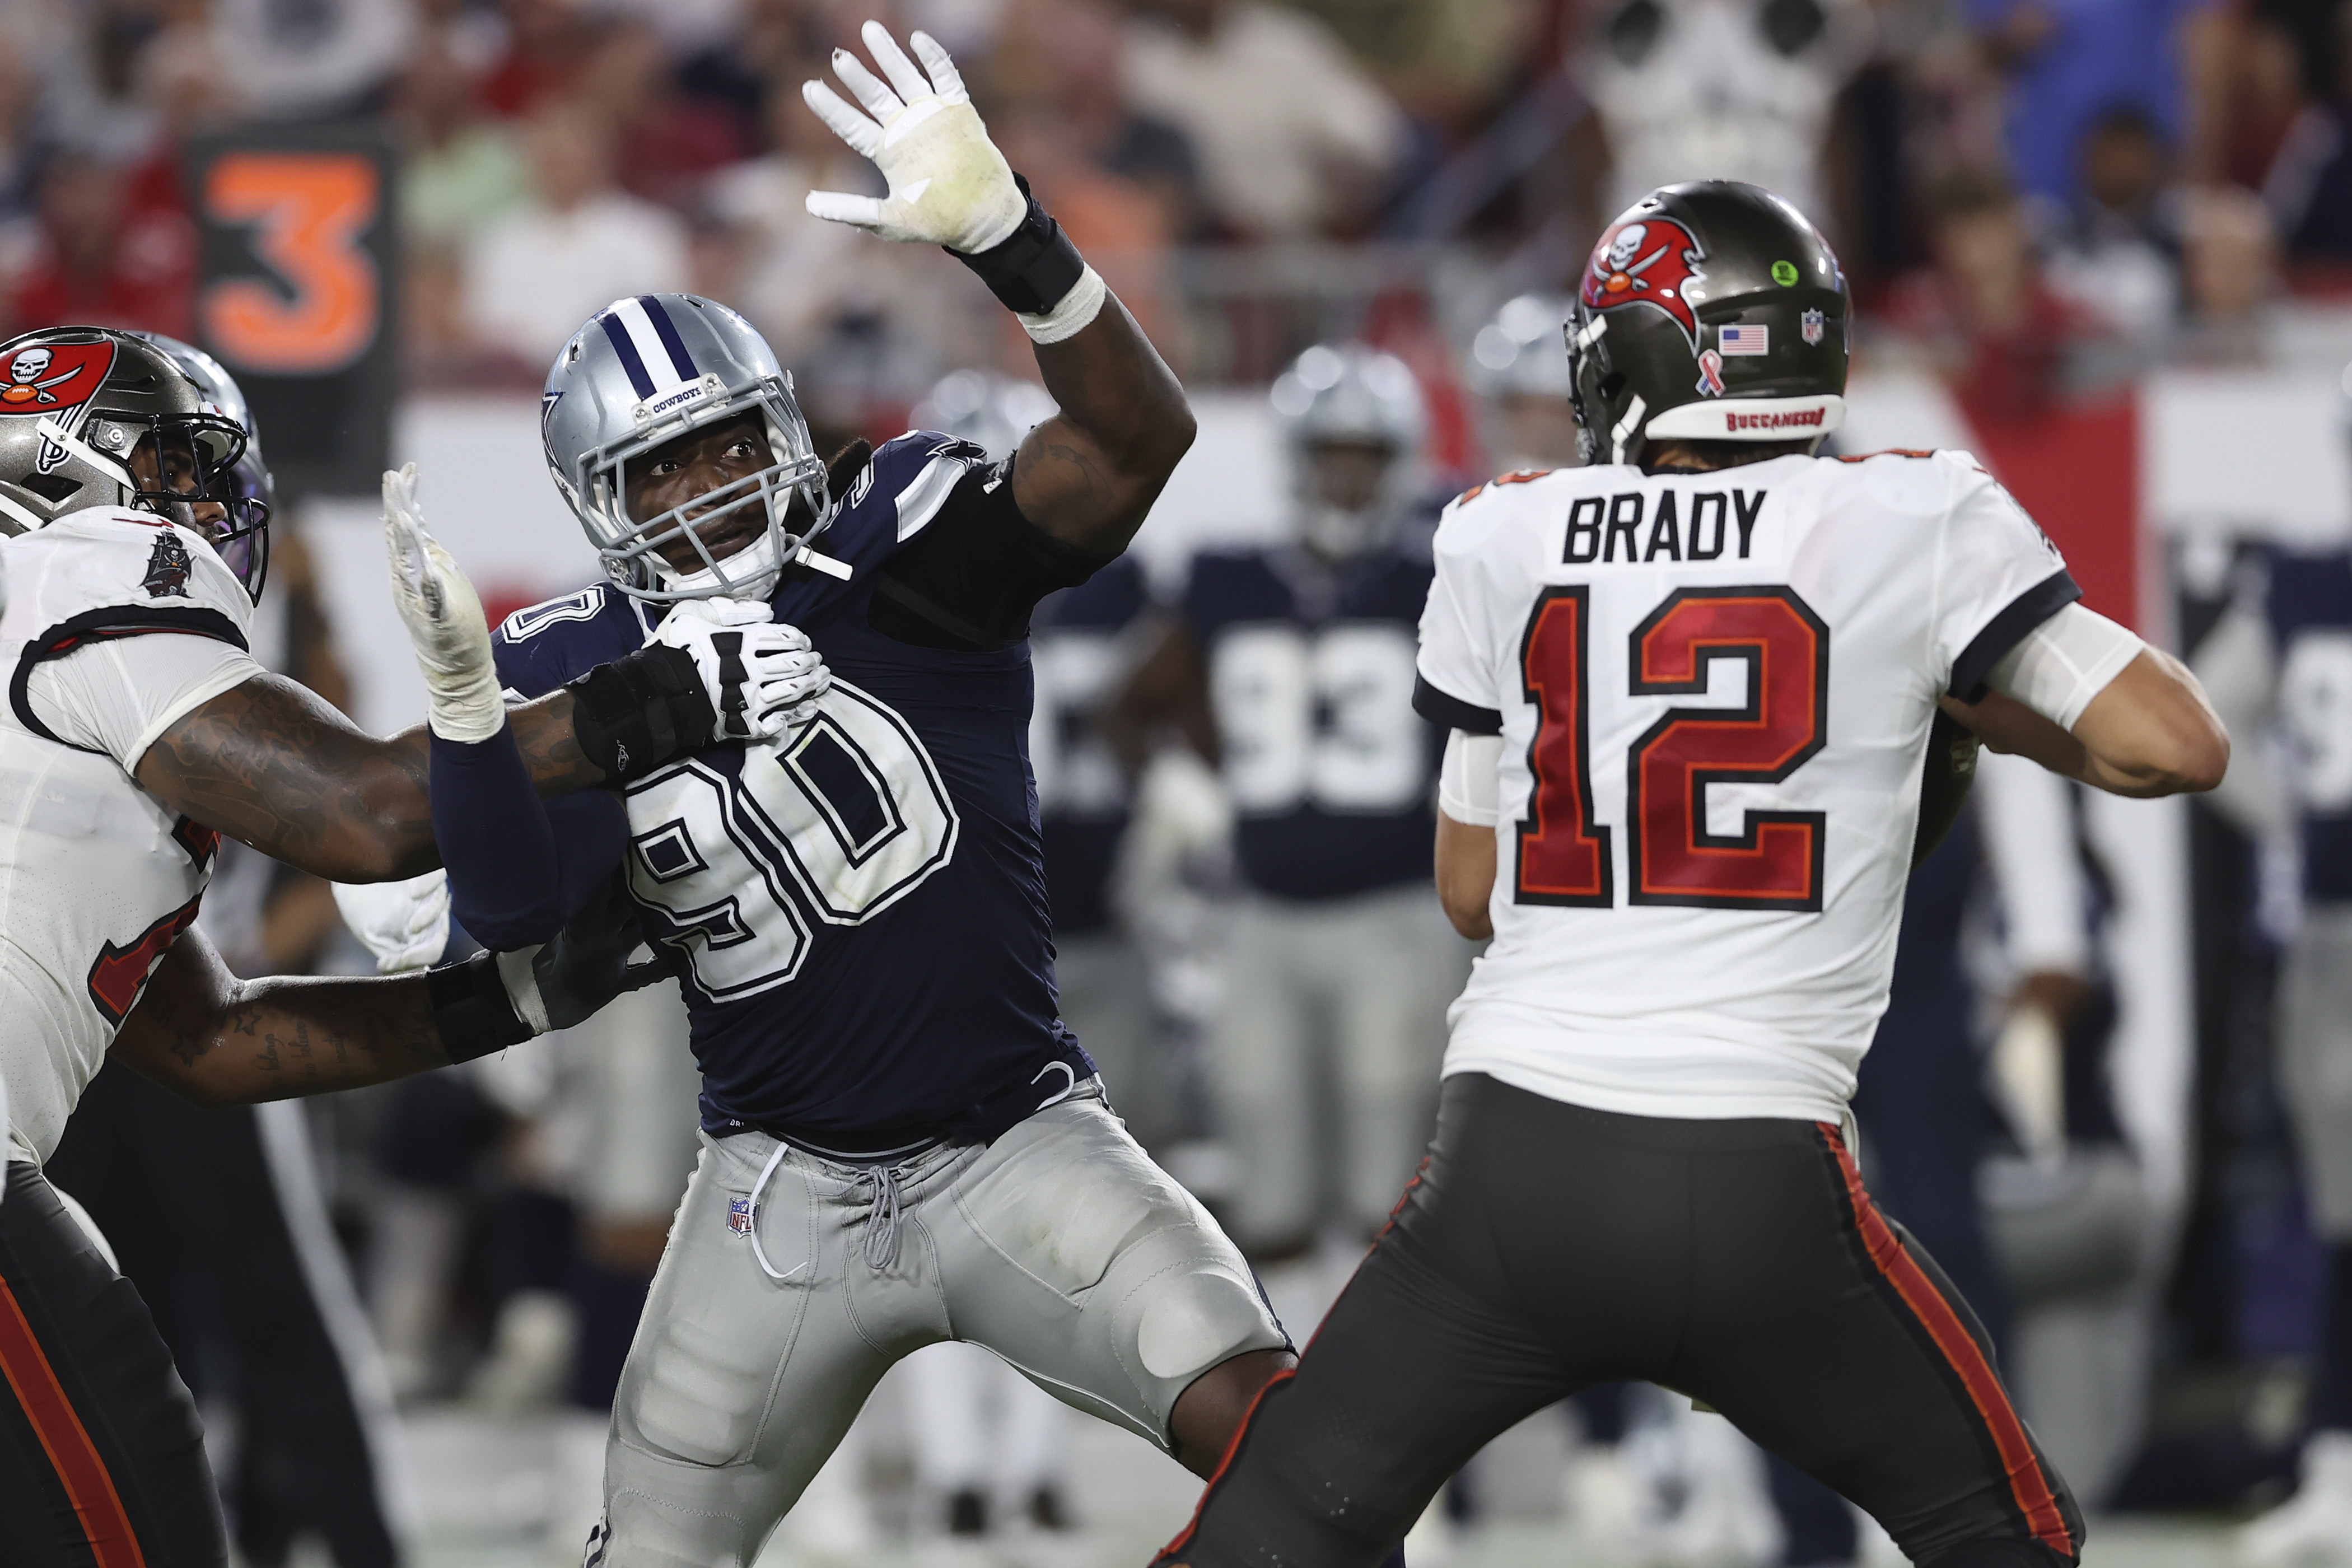 Bucs vs. Cowboys picks and predictions with Tom Brady player props 